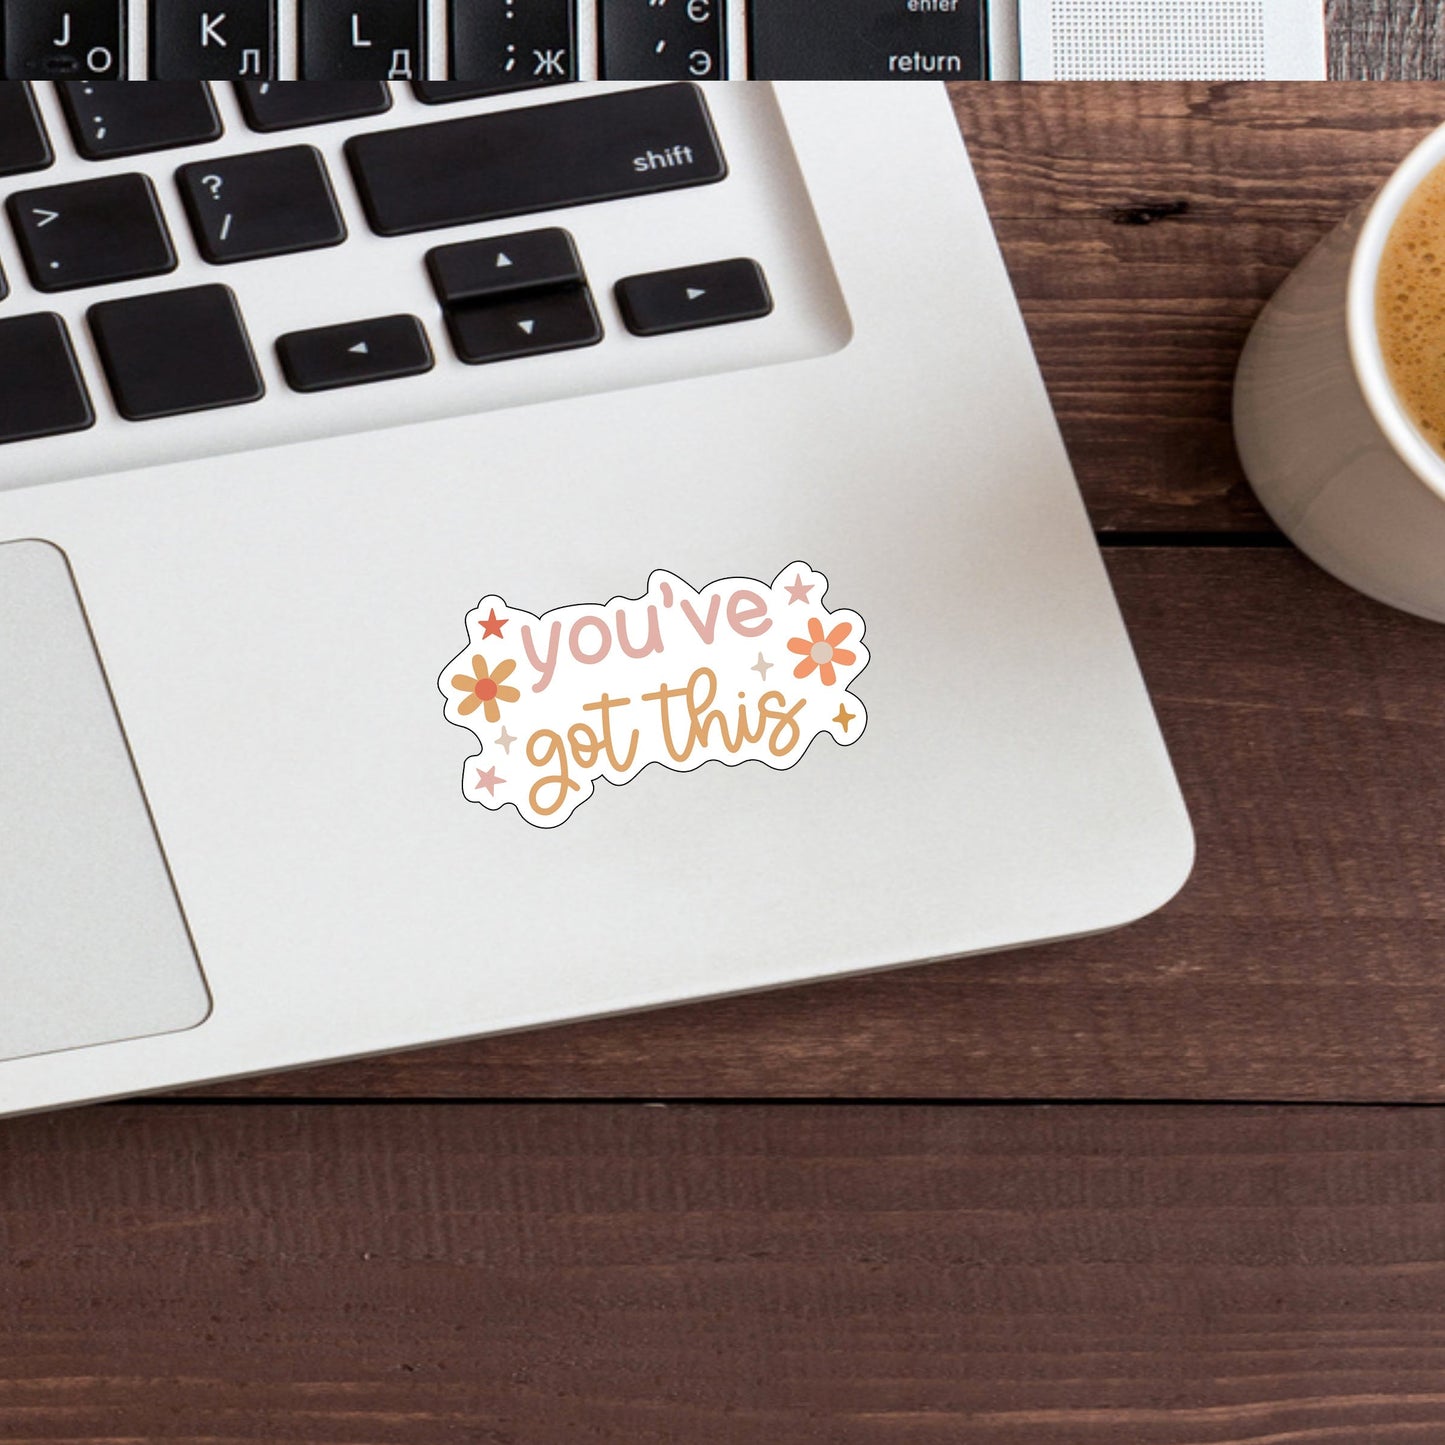 You've Got This Sticker, Express Yourself with our Unique Vinyl Stickers for Laptops, Tablets, and More!